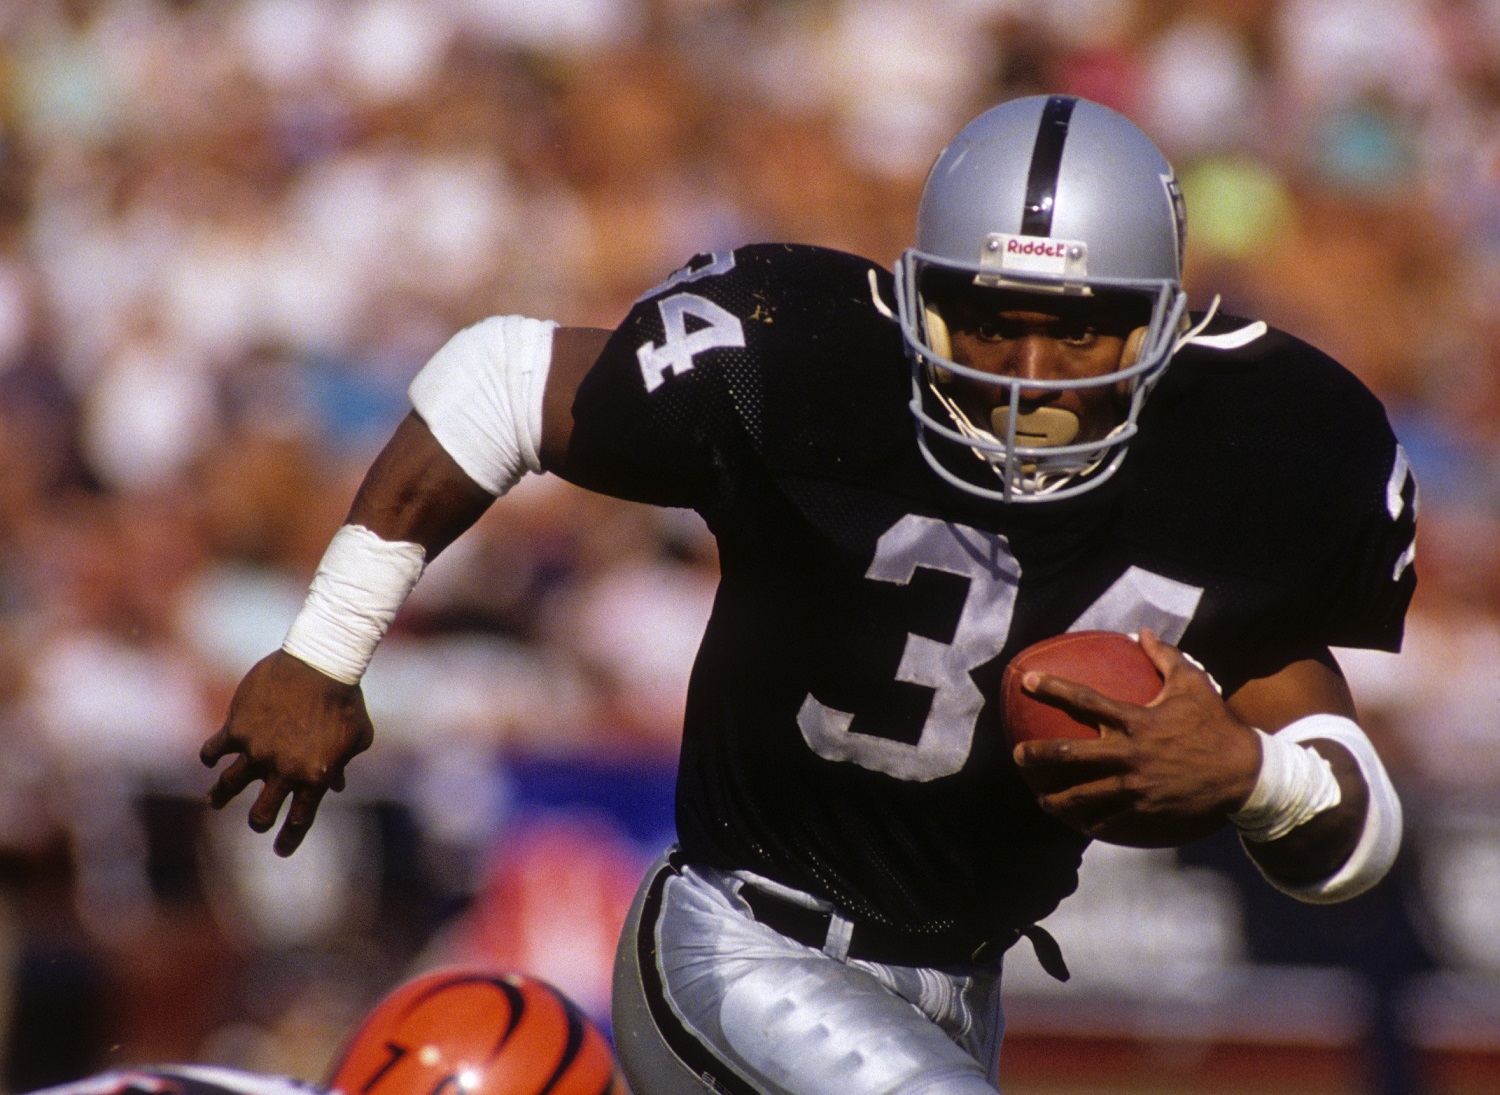 Bo Jackson of the Los Angeles Raiders runs with the ball against the Cincinnati Bengals in an NFL game on Nov. 5, 1989.